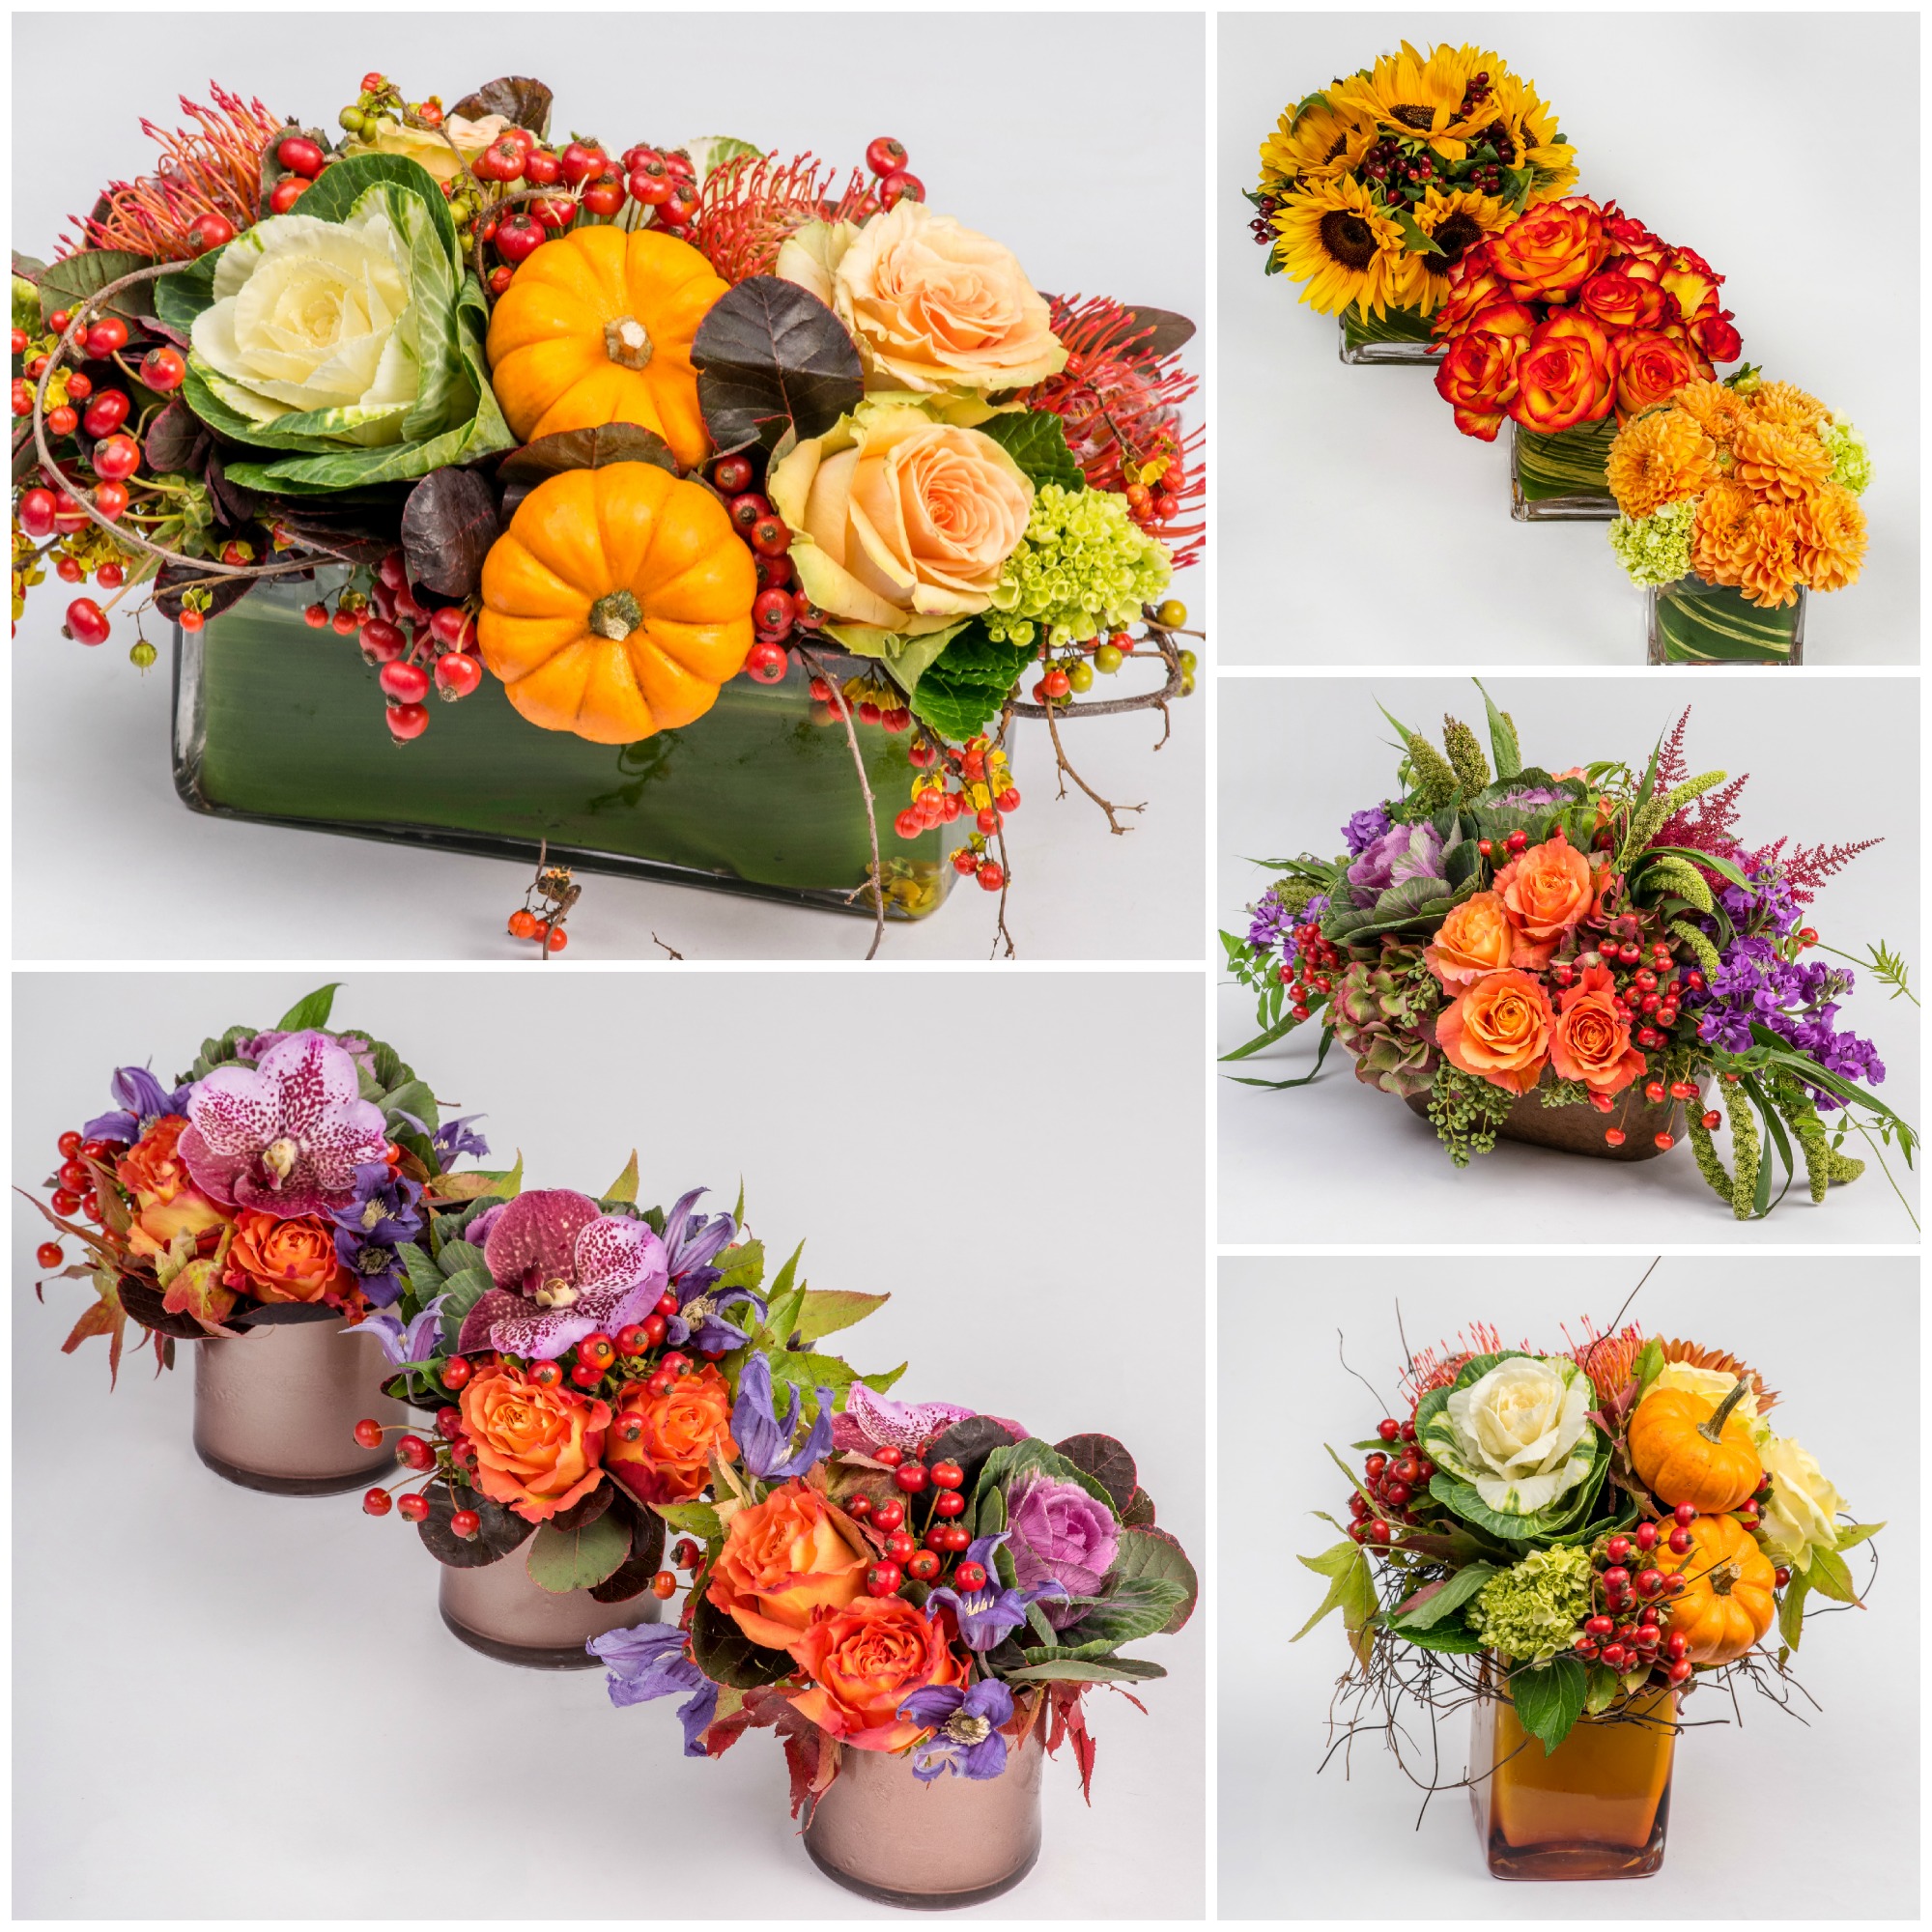 Shop our website, give us a call or visit us at one of our retail locations to order your Thanksgiving centerpiece!